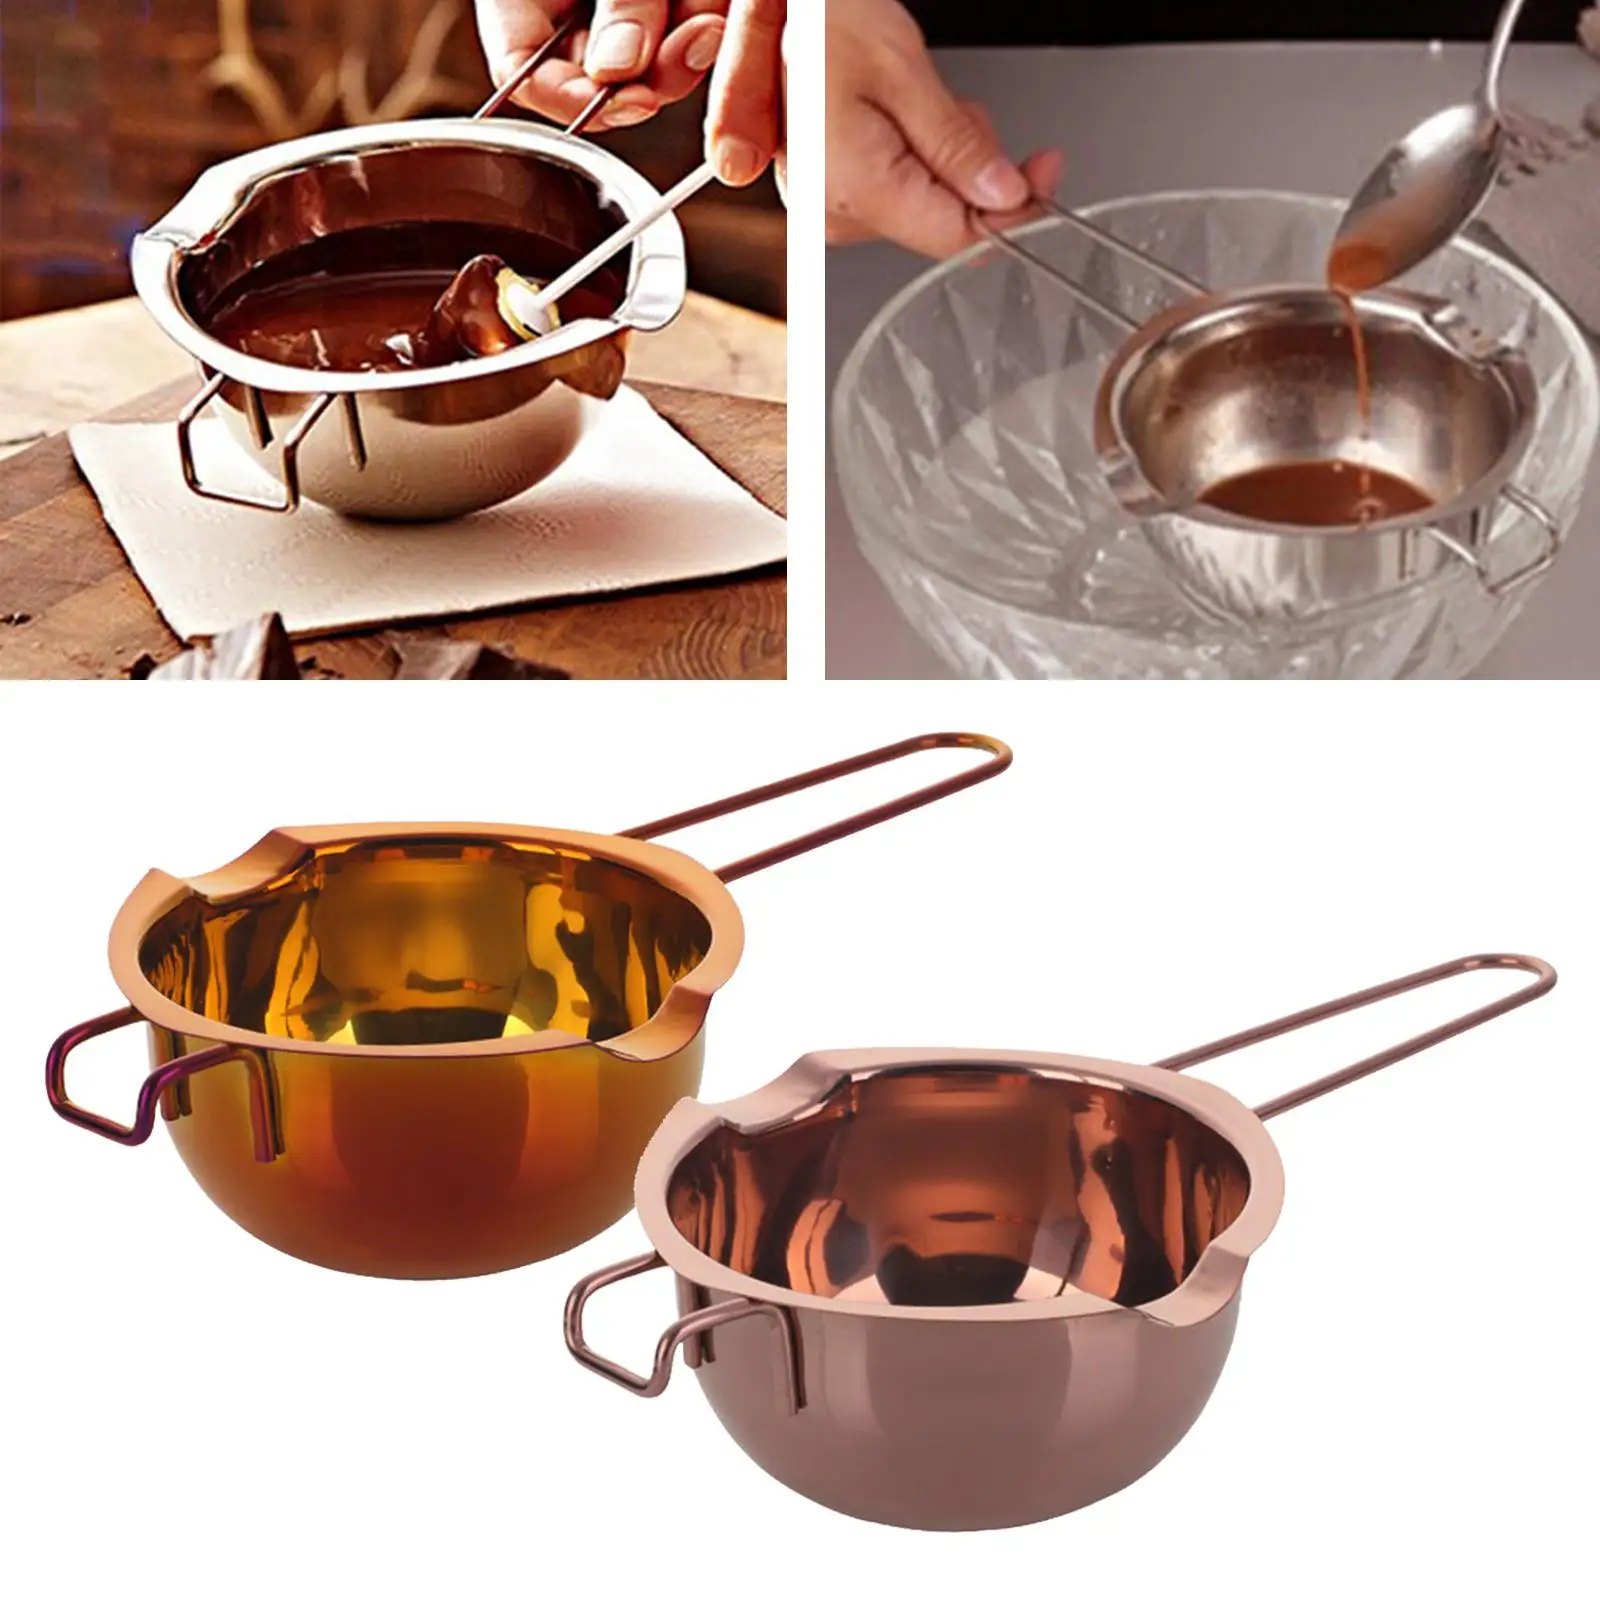 Stainless Steel Double Metls Pot 400 Ml for Melting Chocolate Baking Tool with